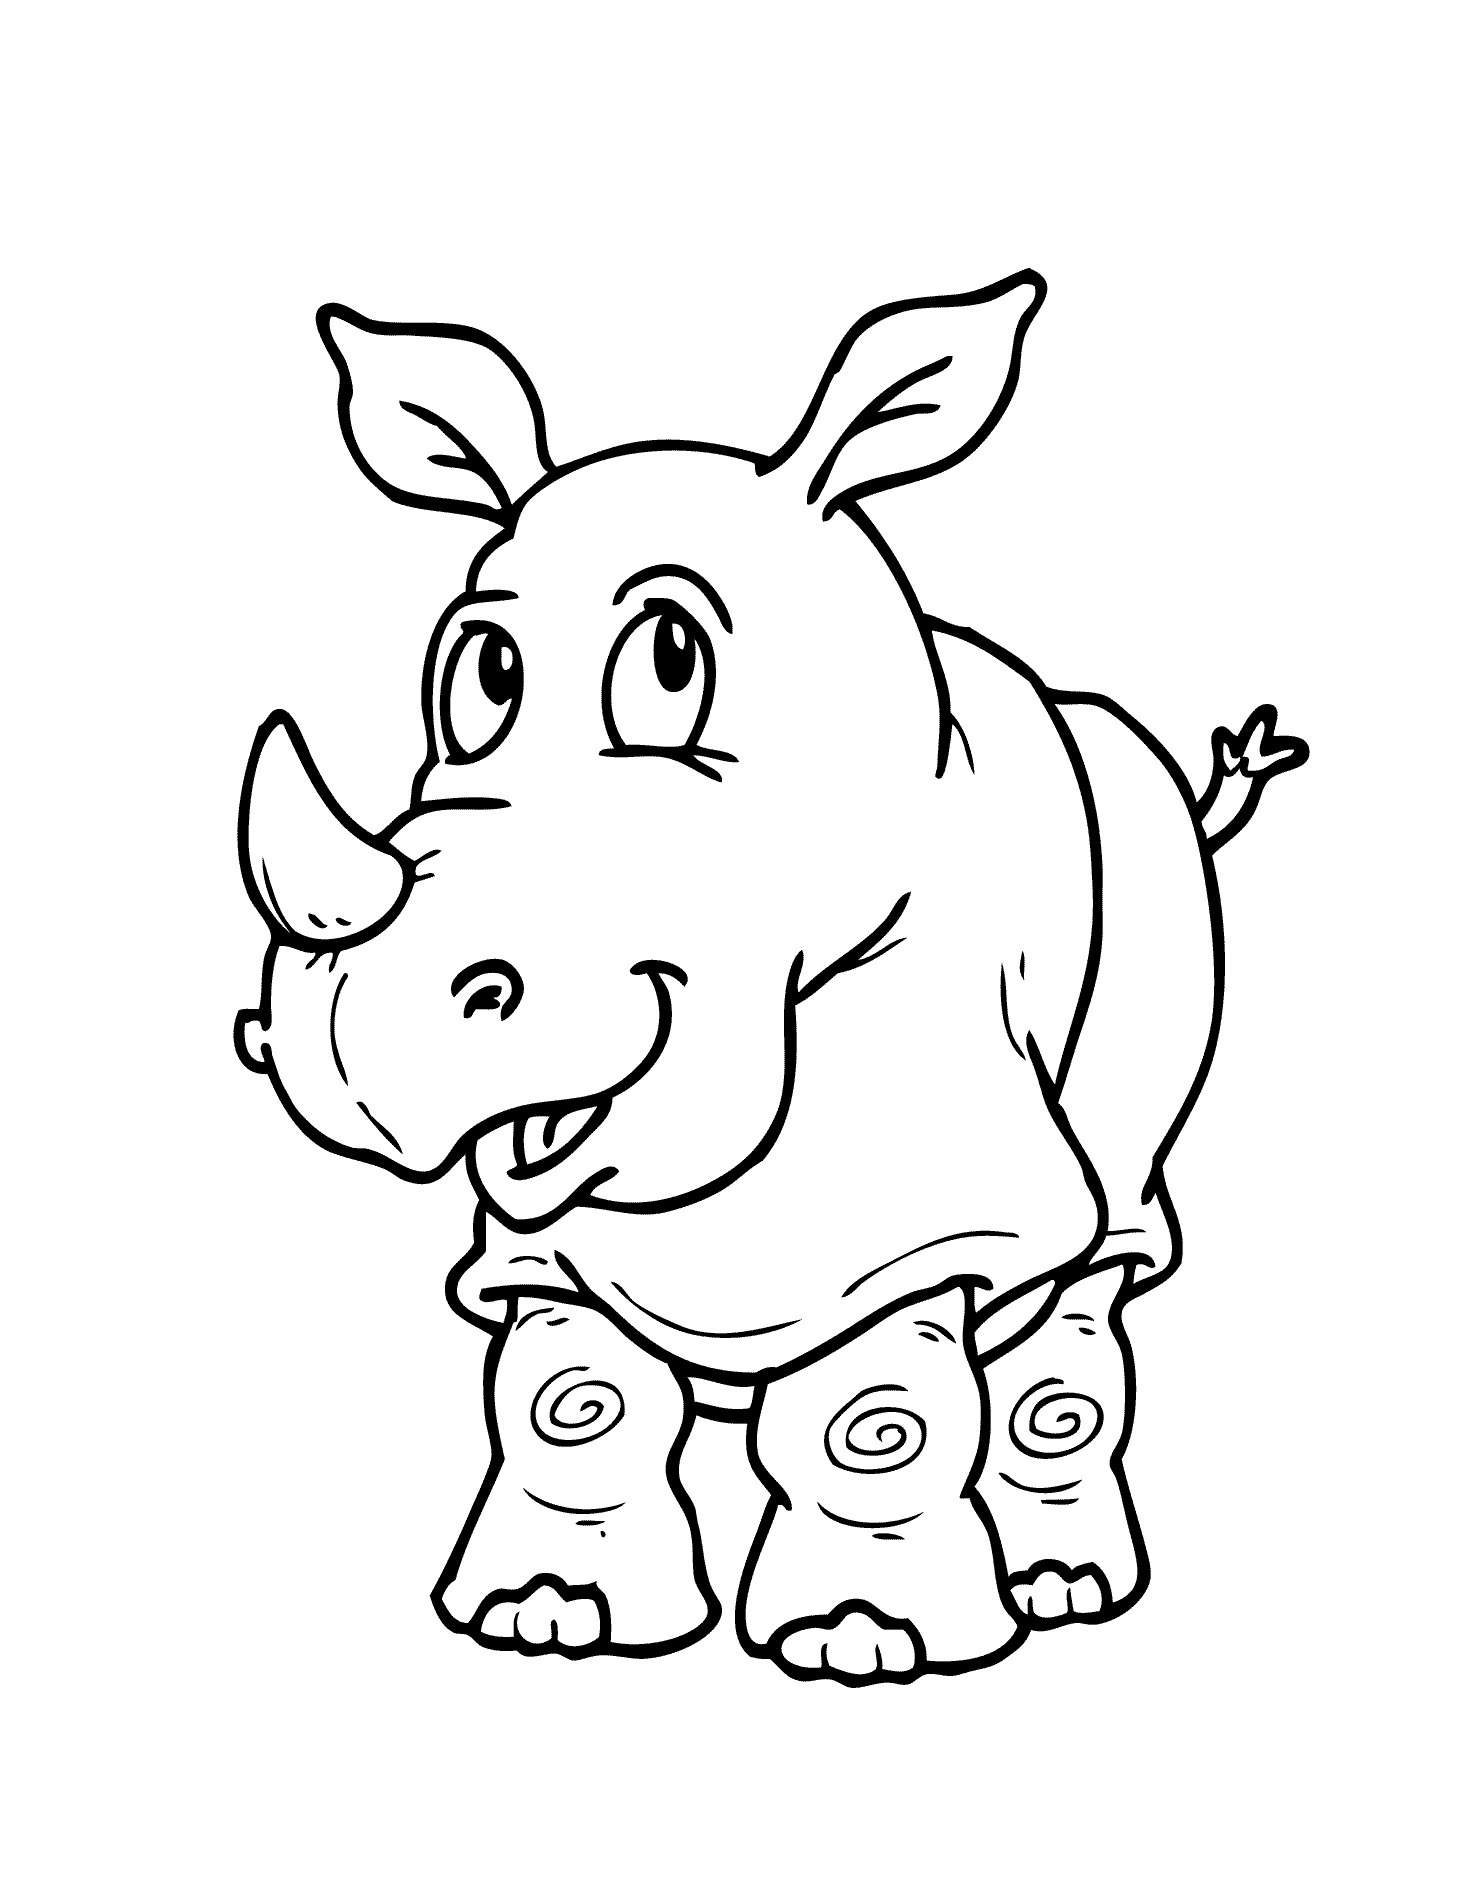 animal colouring pages free animal coloring sheets for kids coloring pages for kids free colouring pages animal 